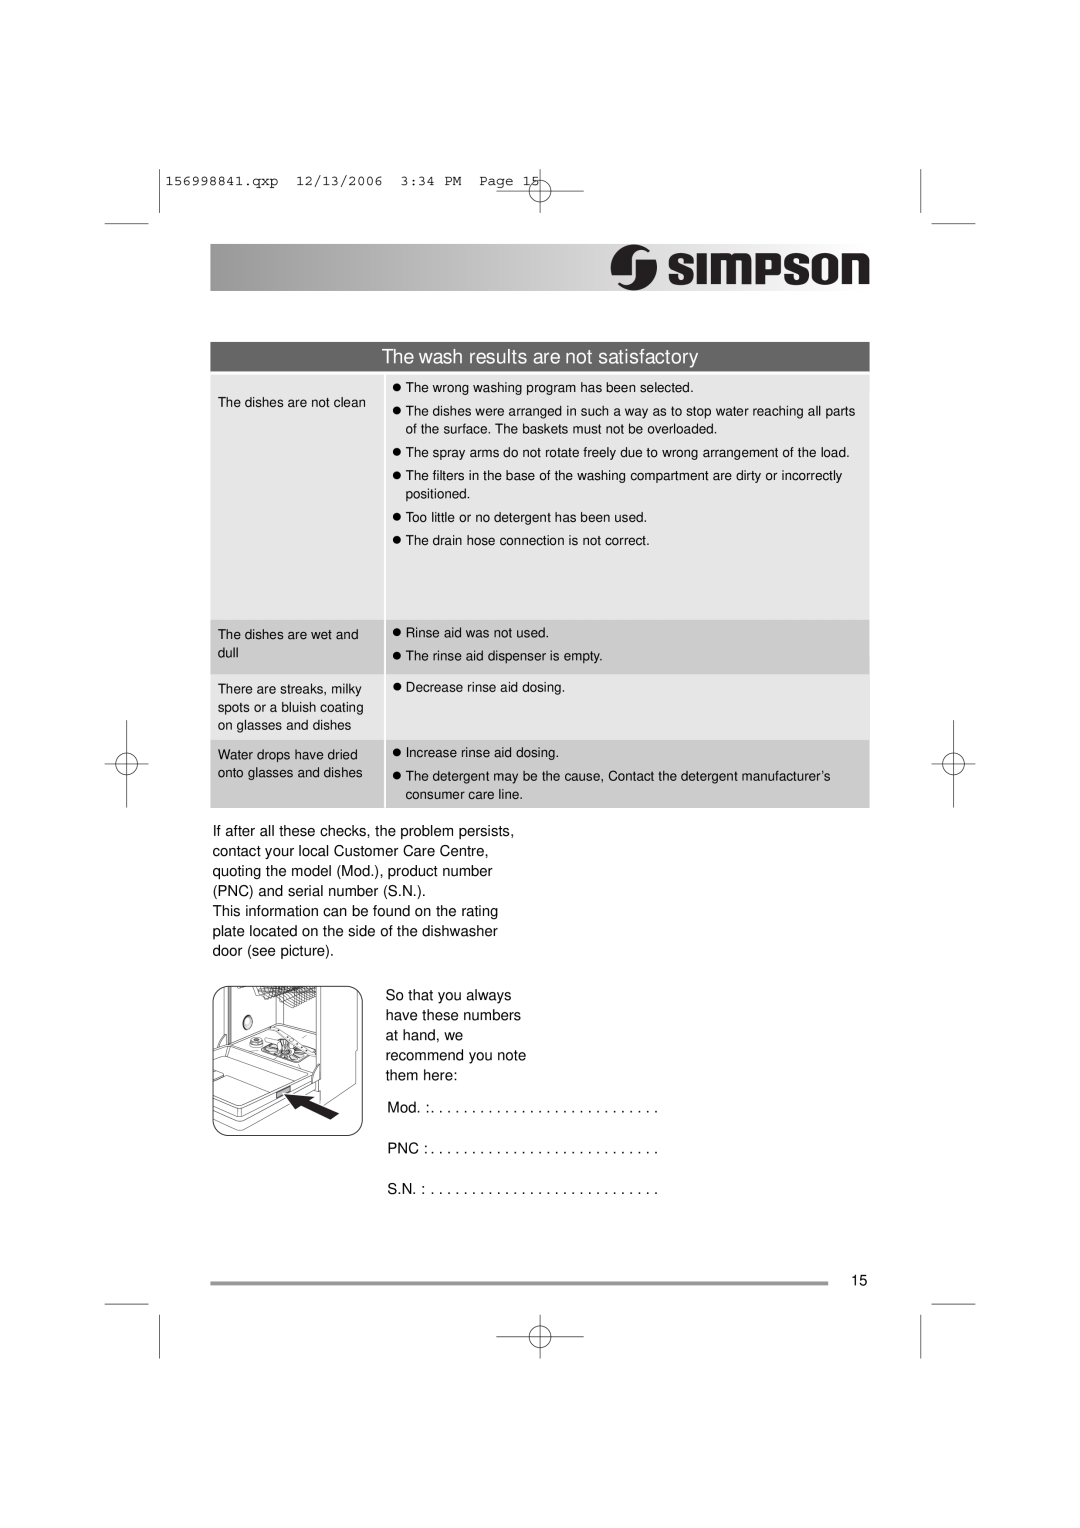 Simpson 52C850 user manual The wash results are not satisfactory, Mod PNC S.N 